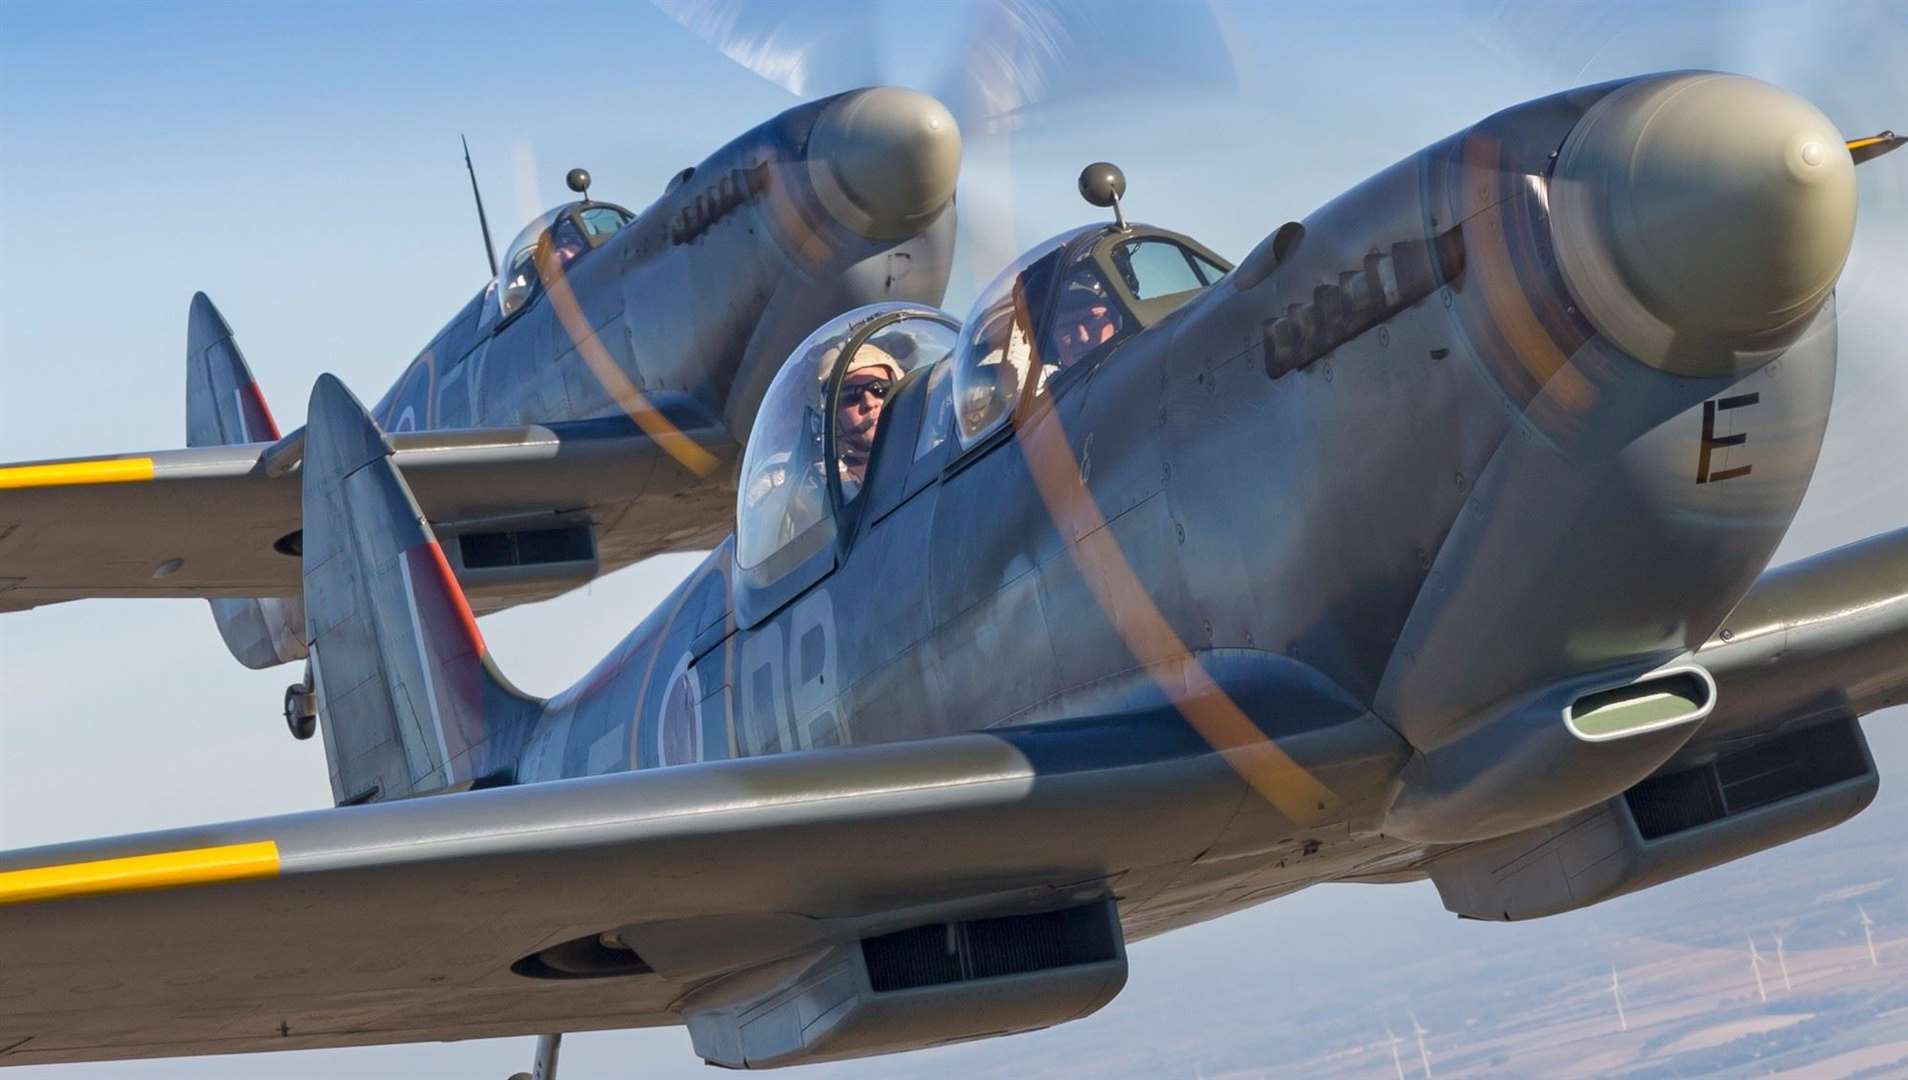 The 2019 Battle of Britain Airshow combines choreographed Battle-of-Britain era aircraft displays with family friendly attractions and re-enactments. It has something for everyone! (12840952)